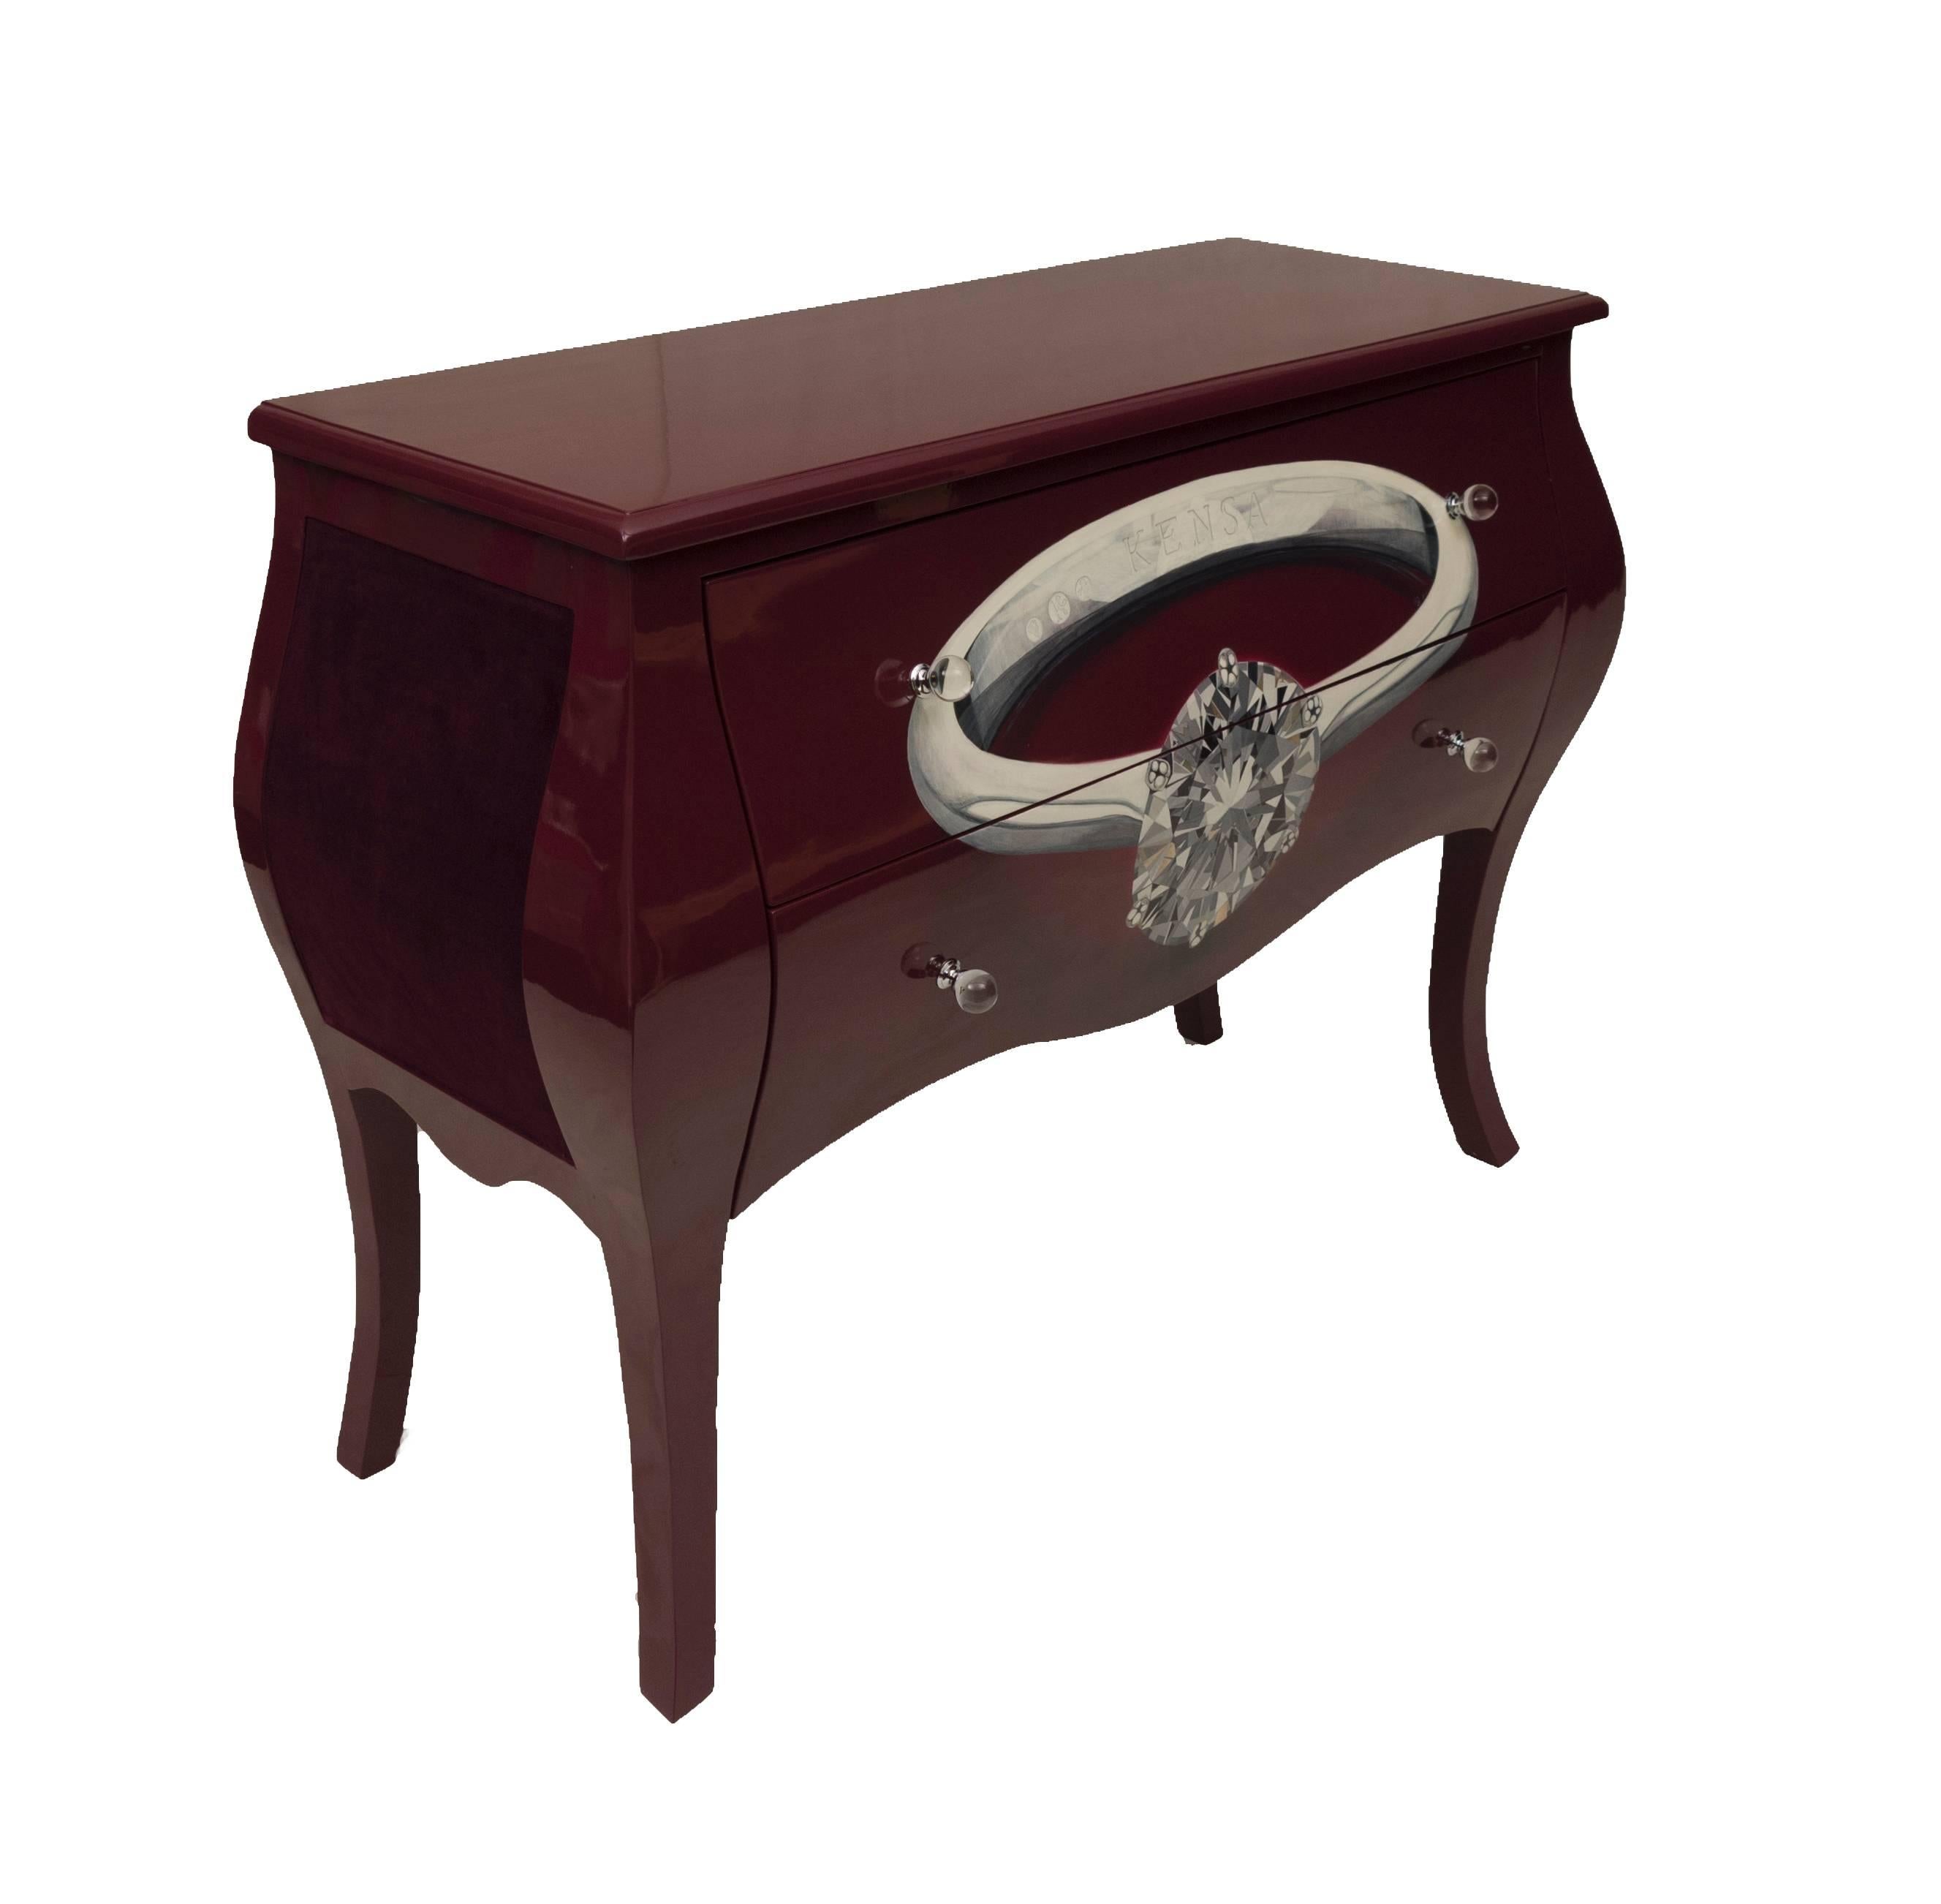 This richly lacquered sideboard with hand-painted diamond ring is ideal to complement both functional and contemporary interiors. 

This hardwood sideboard compromises of two large drawers lined with purple velvet, the side panels are also lined